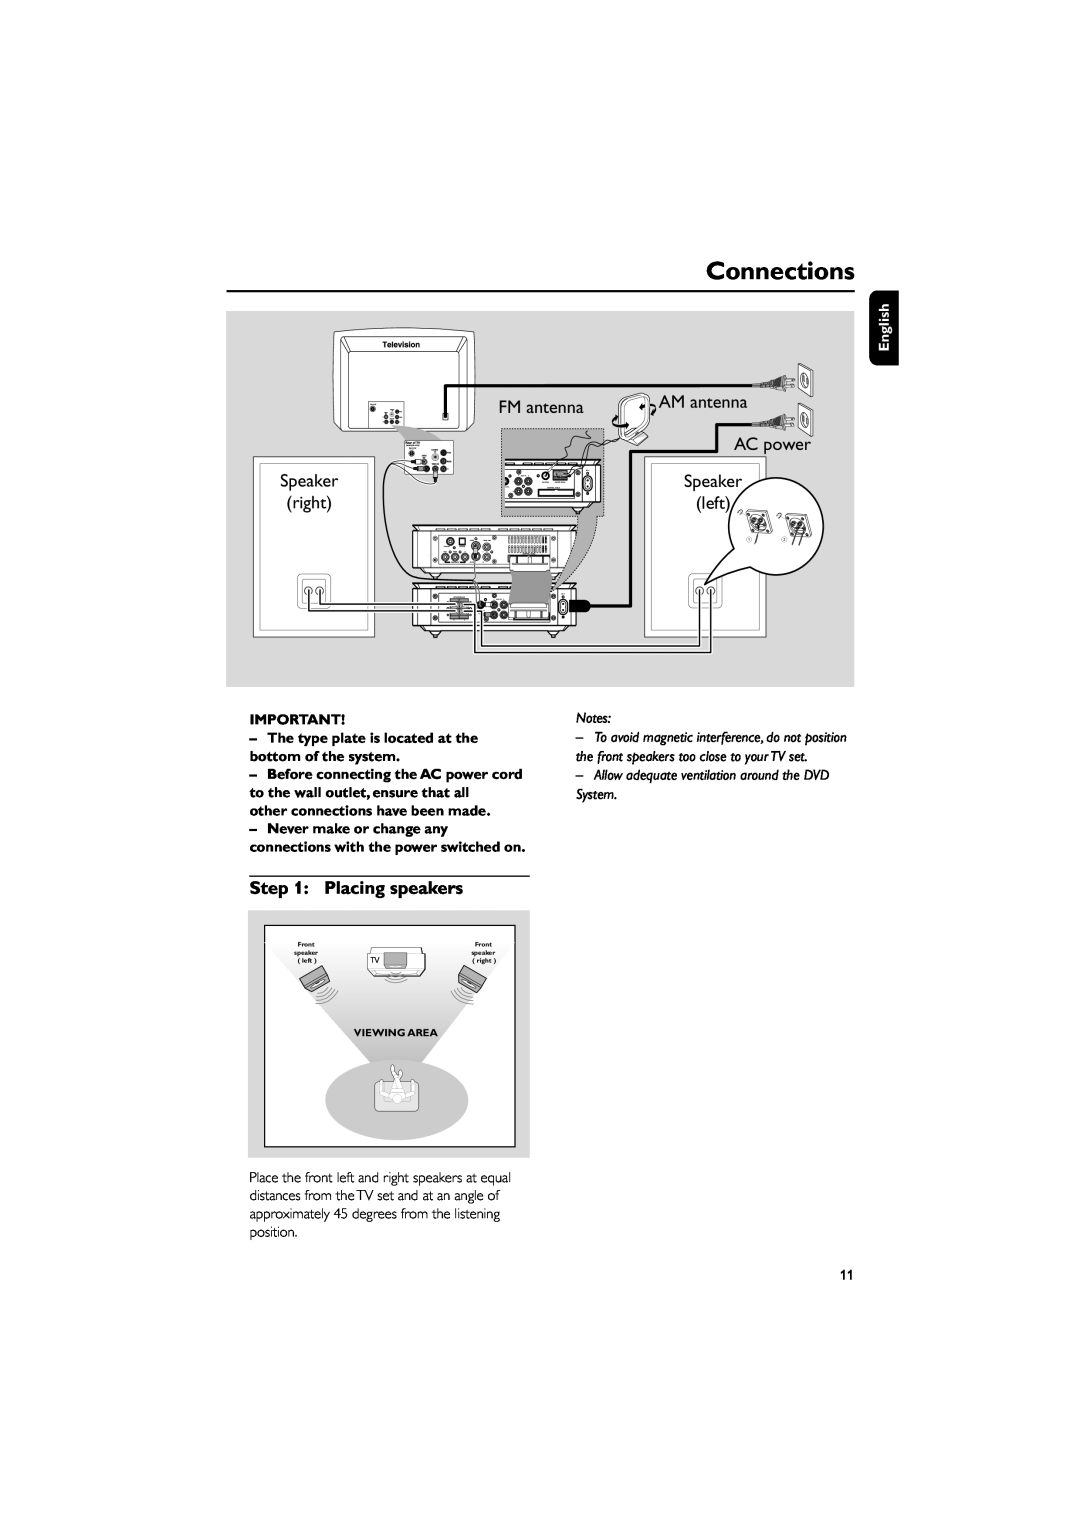 Philips MCD708 Connections, FM antenna, AC power, right, left, Step, AM antenna, Placing speakers, English, Viewing Area 